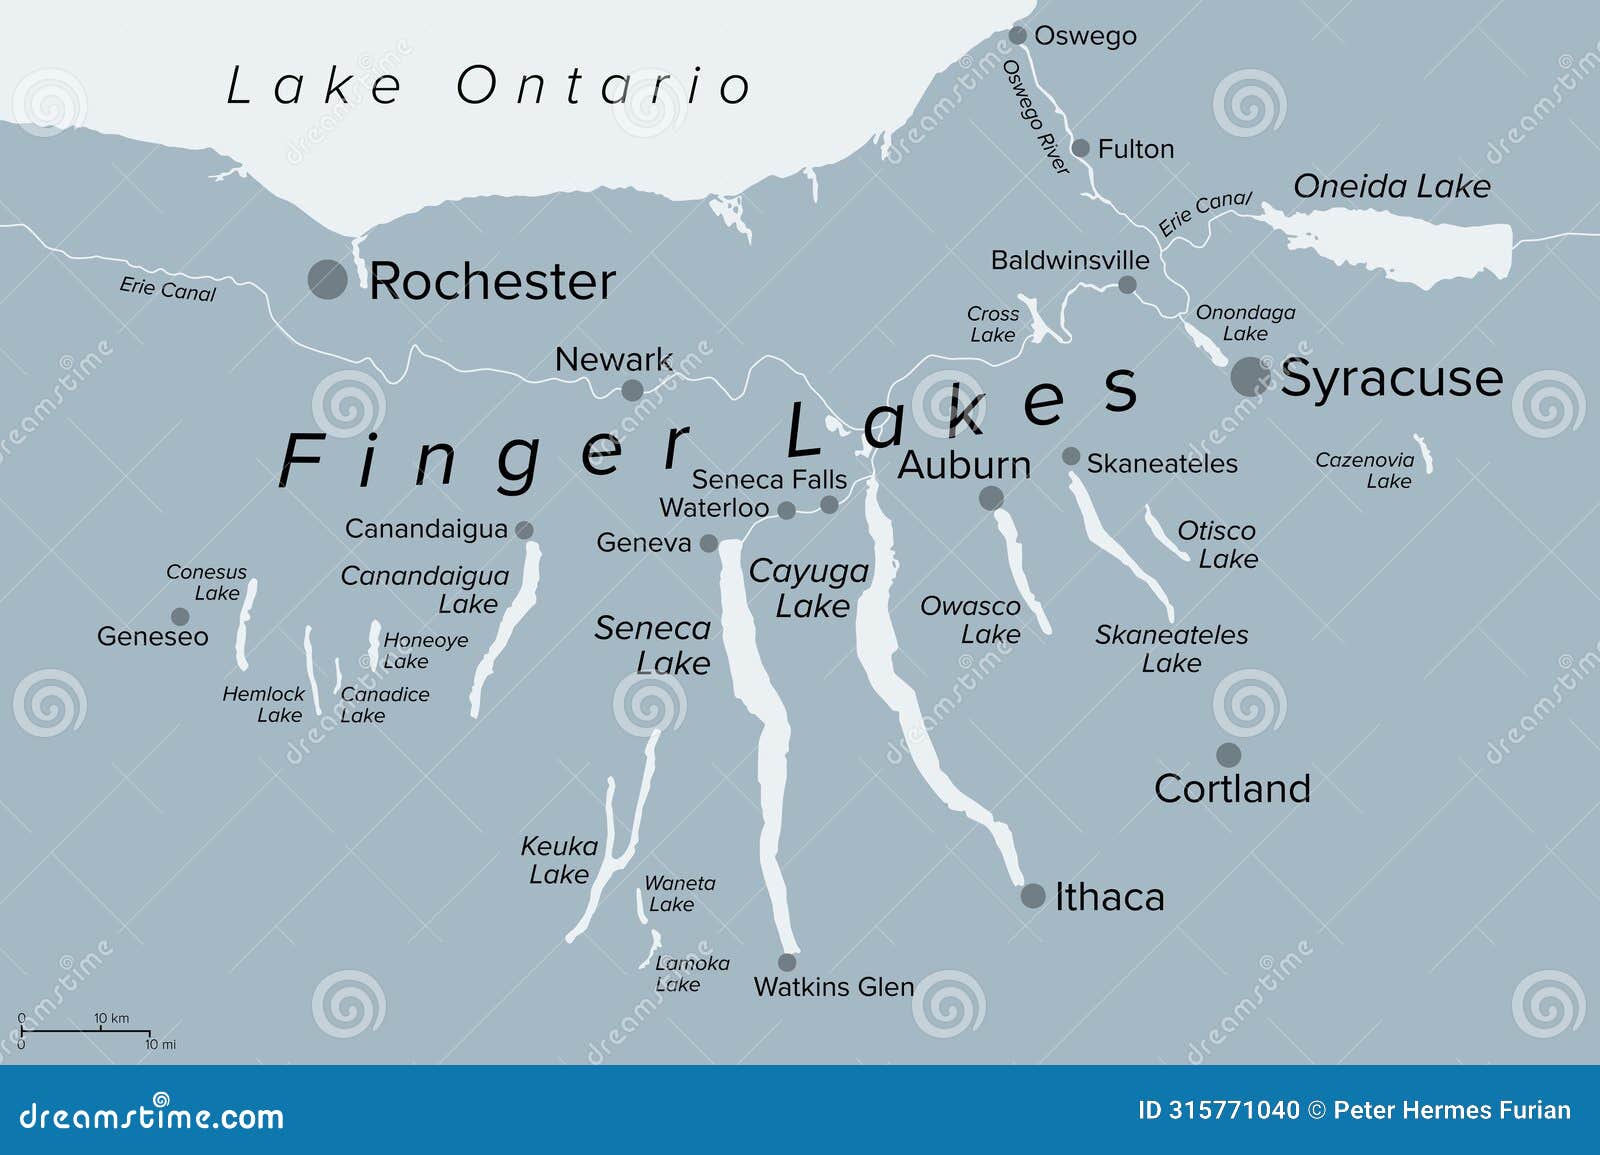 finger lakes region in new york state, united states, gray political map